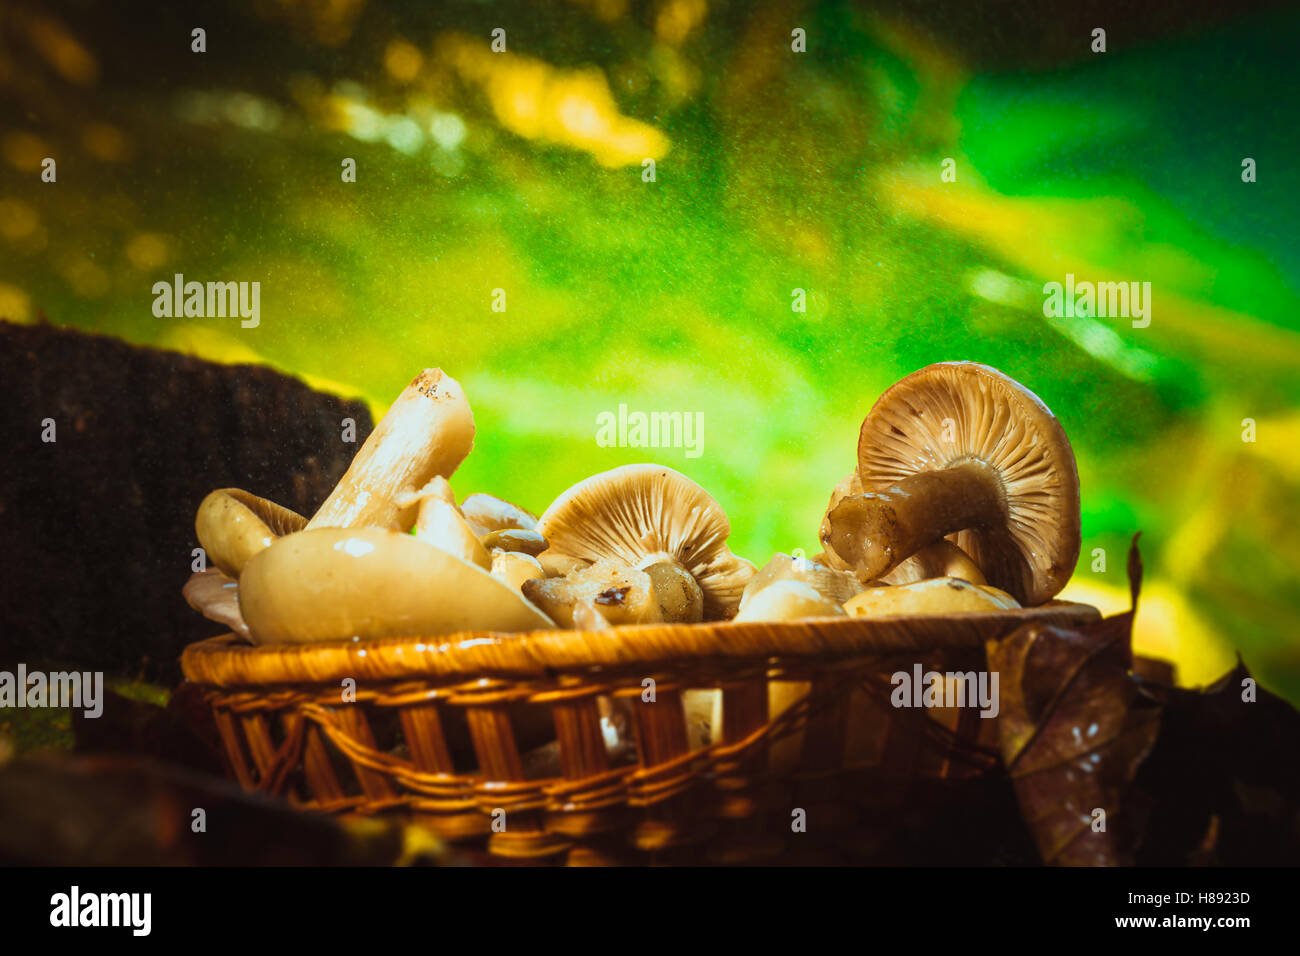 russula mushrooms in a wicker basket close up. Stock Photo